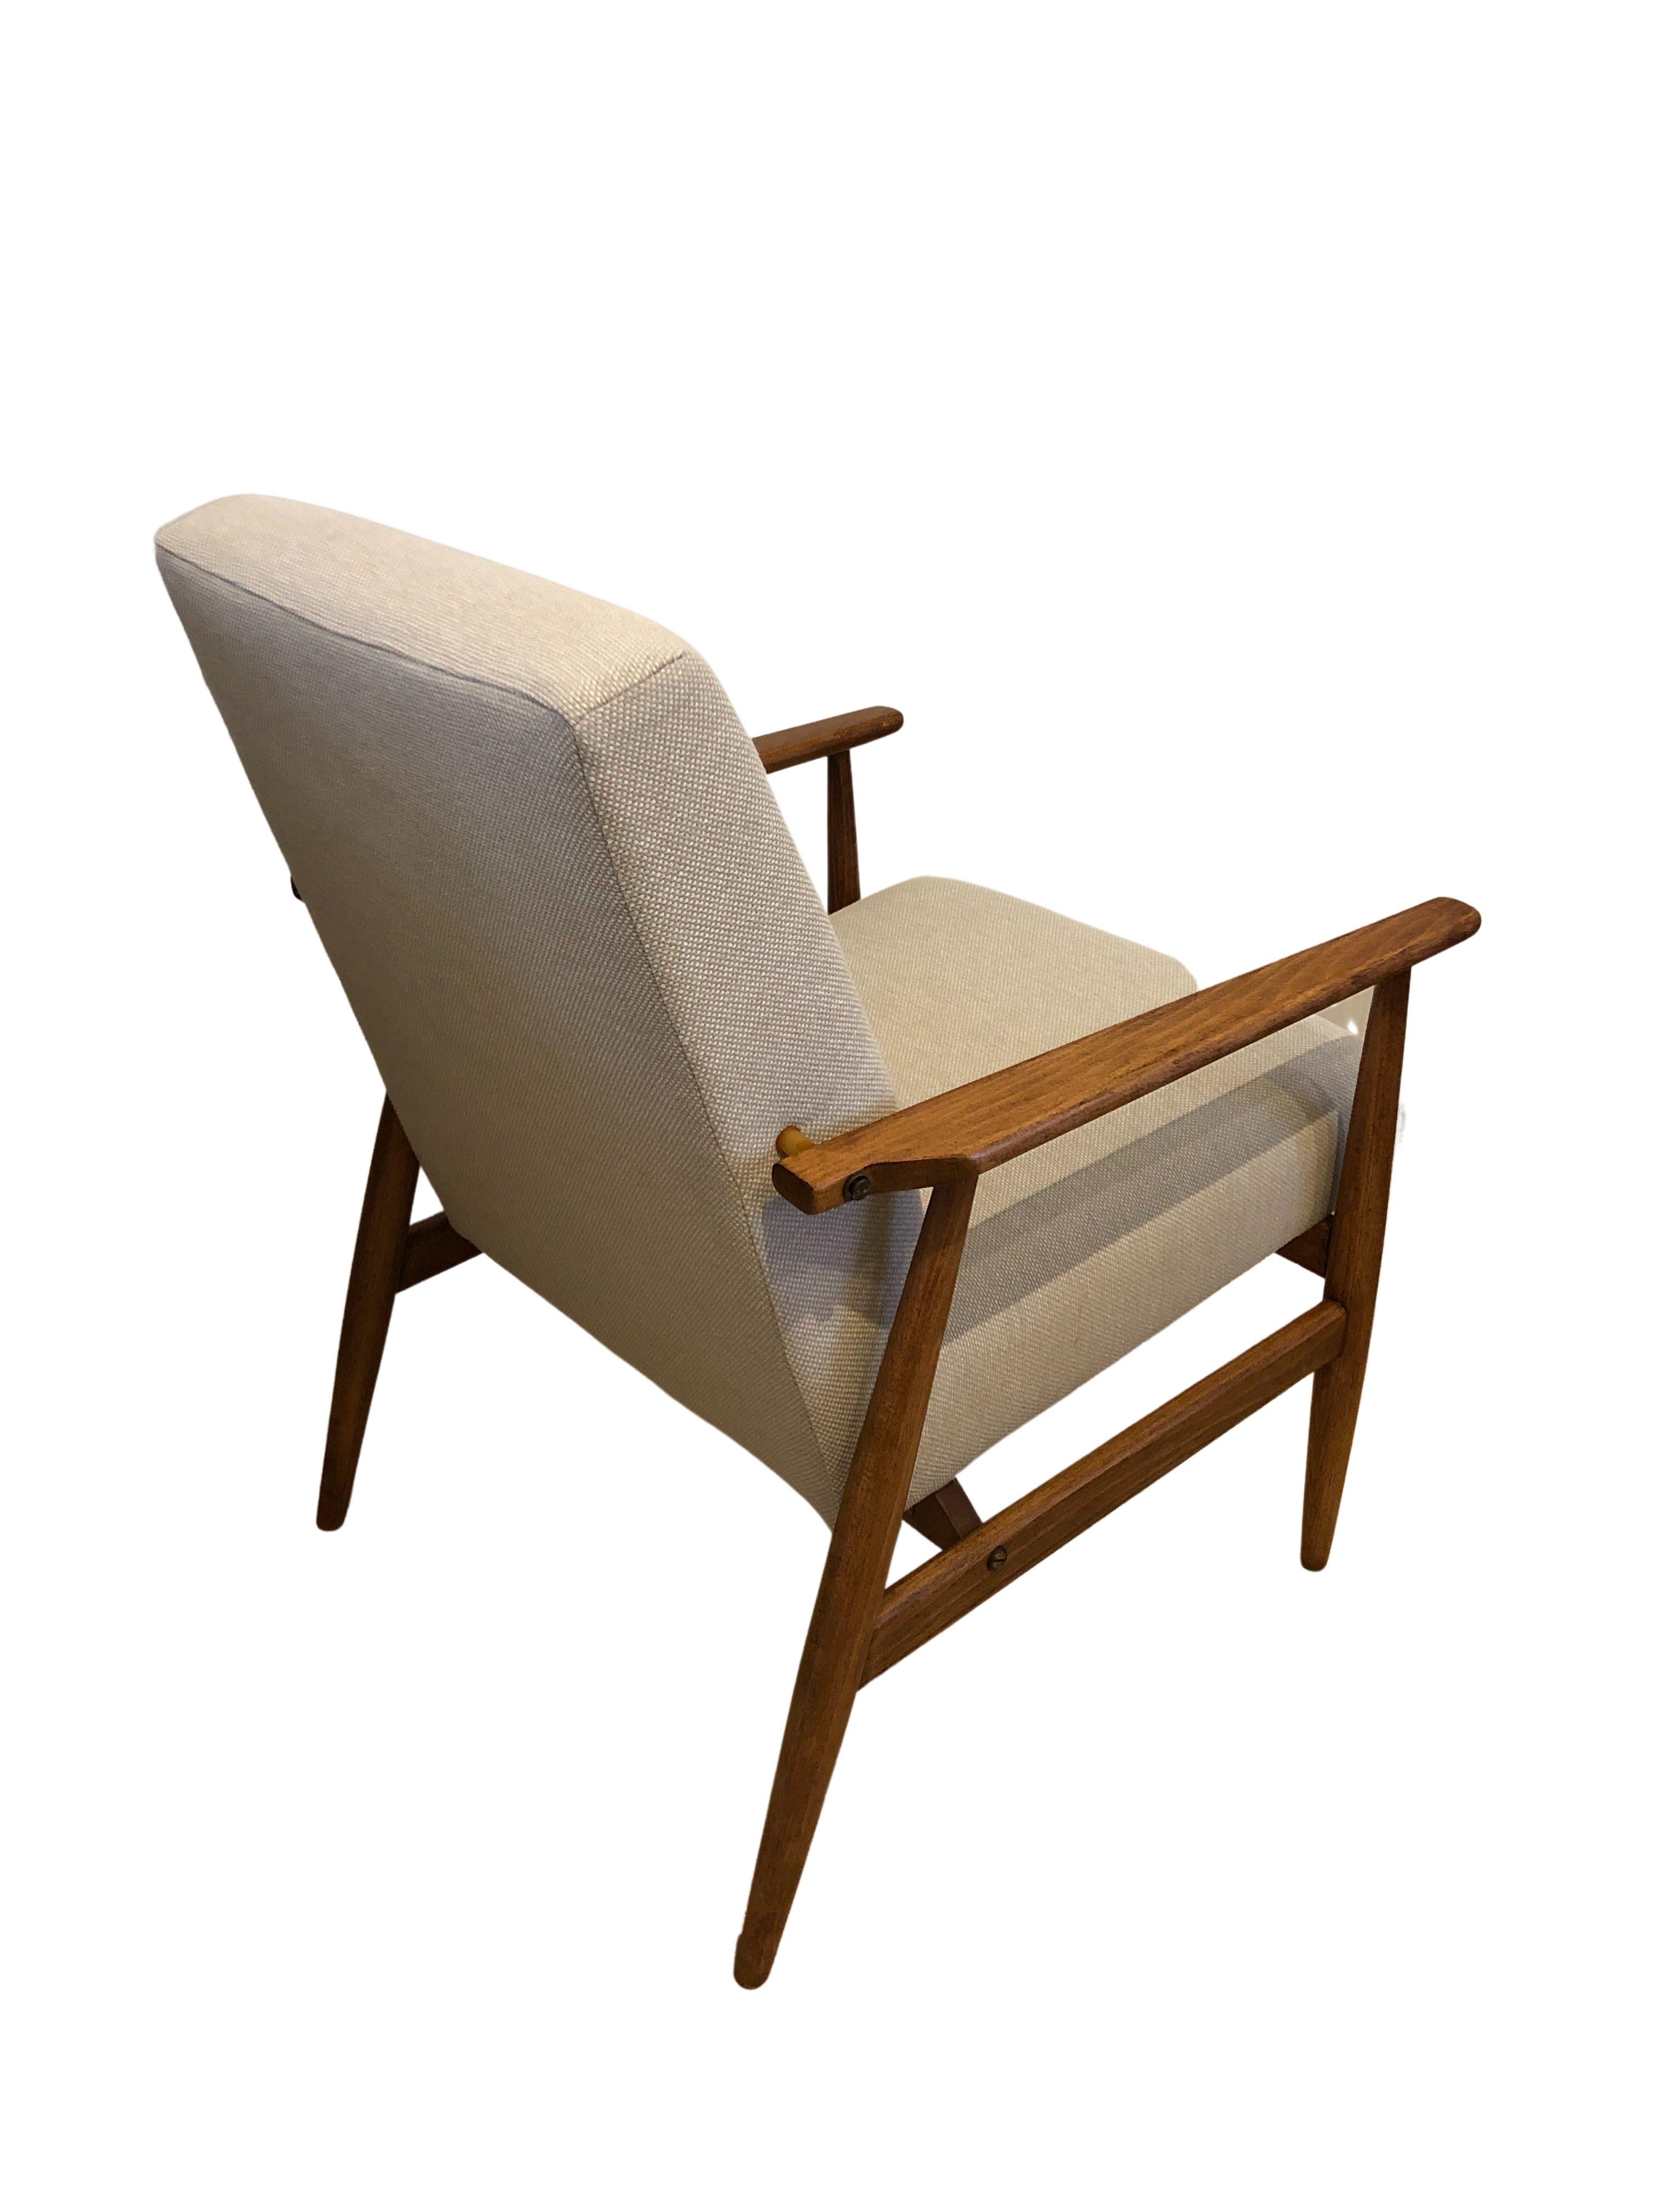 Midcentury Armchair by Henryk Lis in Beige Cotton Linen Upholstery, 1960s For Sale 1